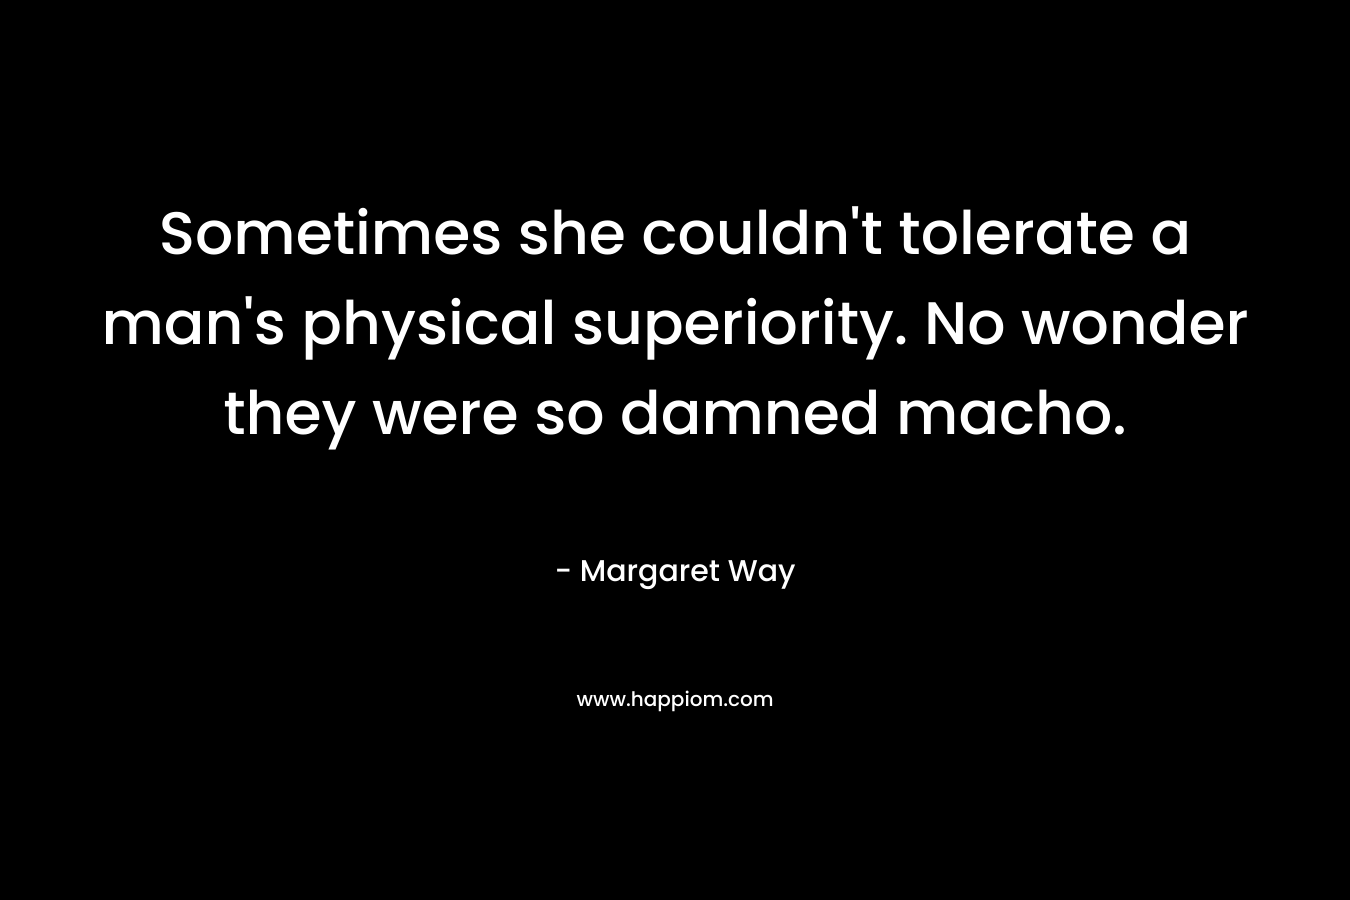 Sometimes she couldn't tolerate a man's physical superiority. No wonder they were so damned macho.